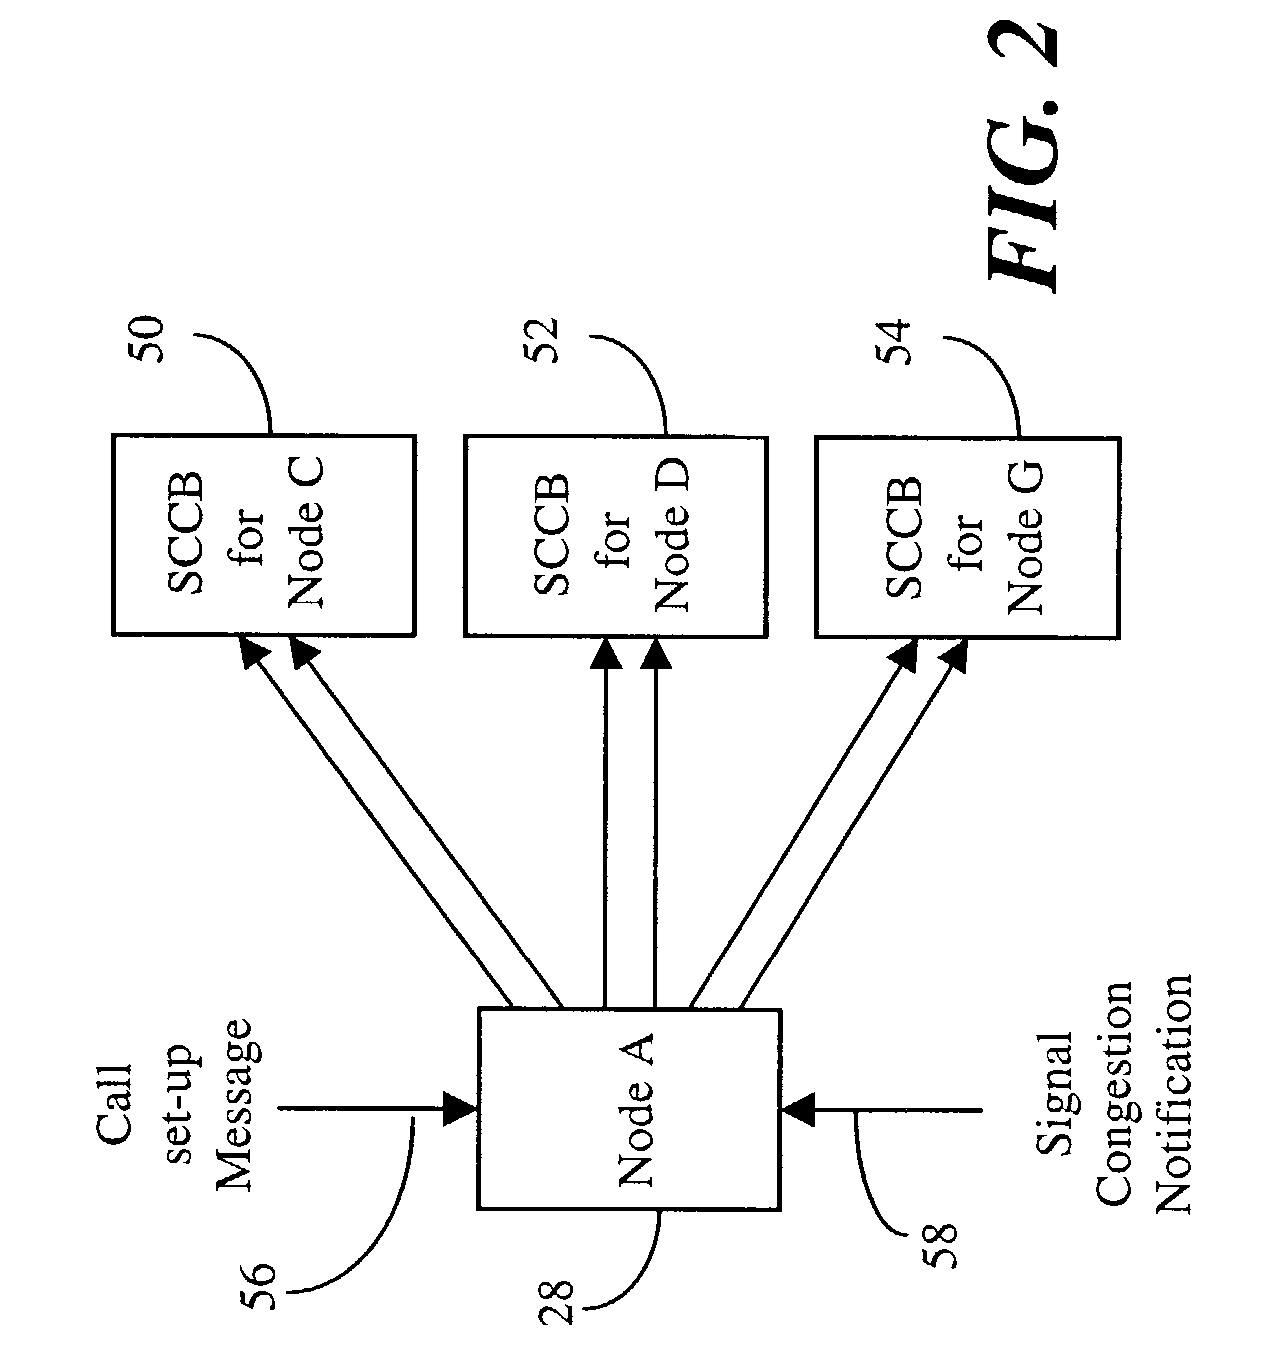 Intelligent routing for effective utilization of network signaling resources